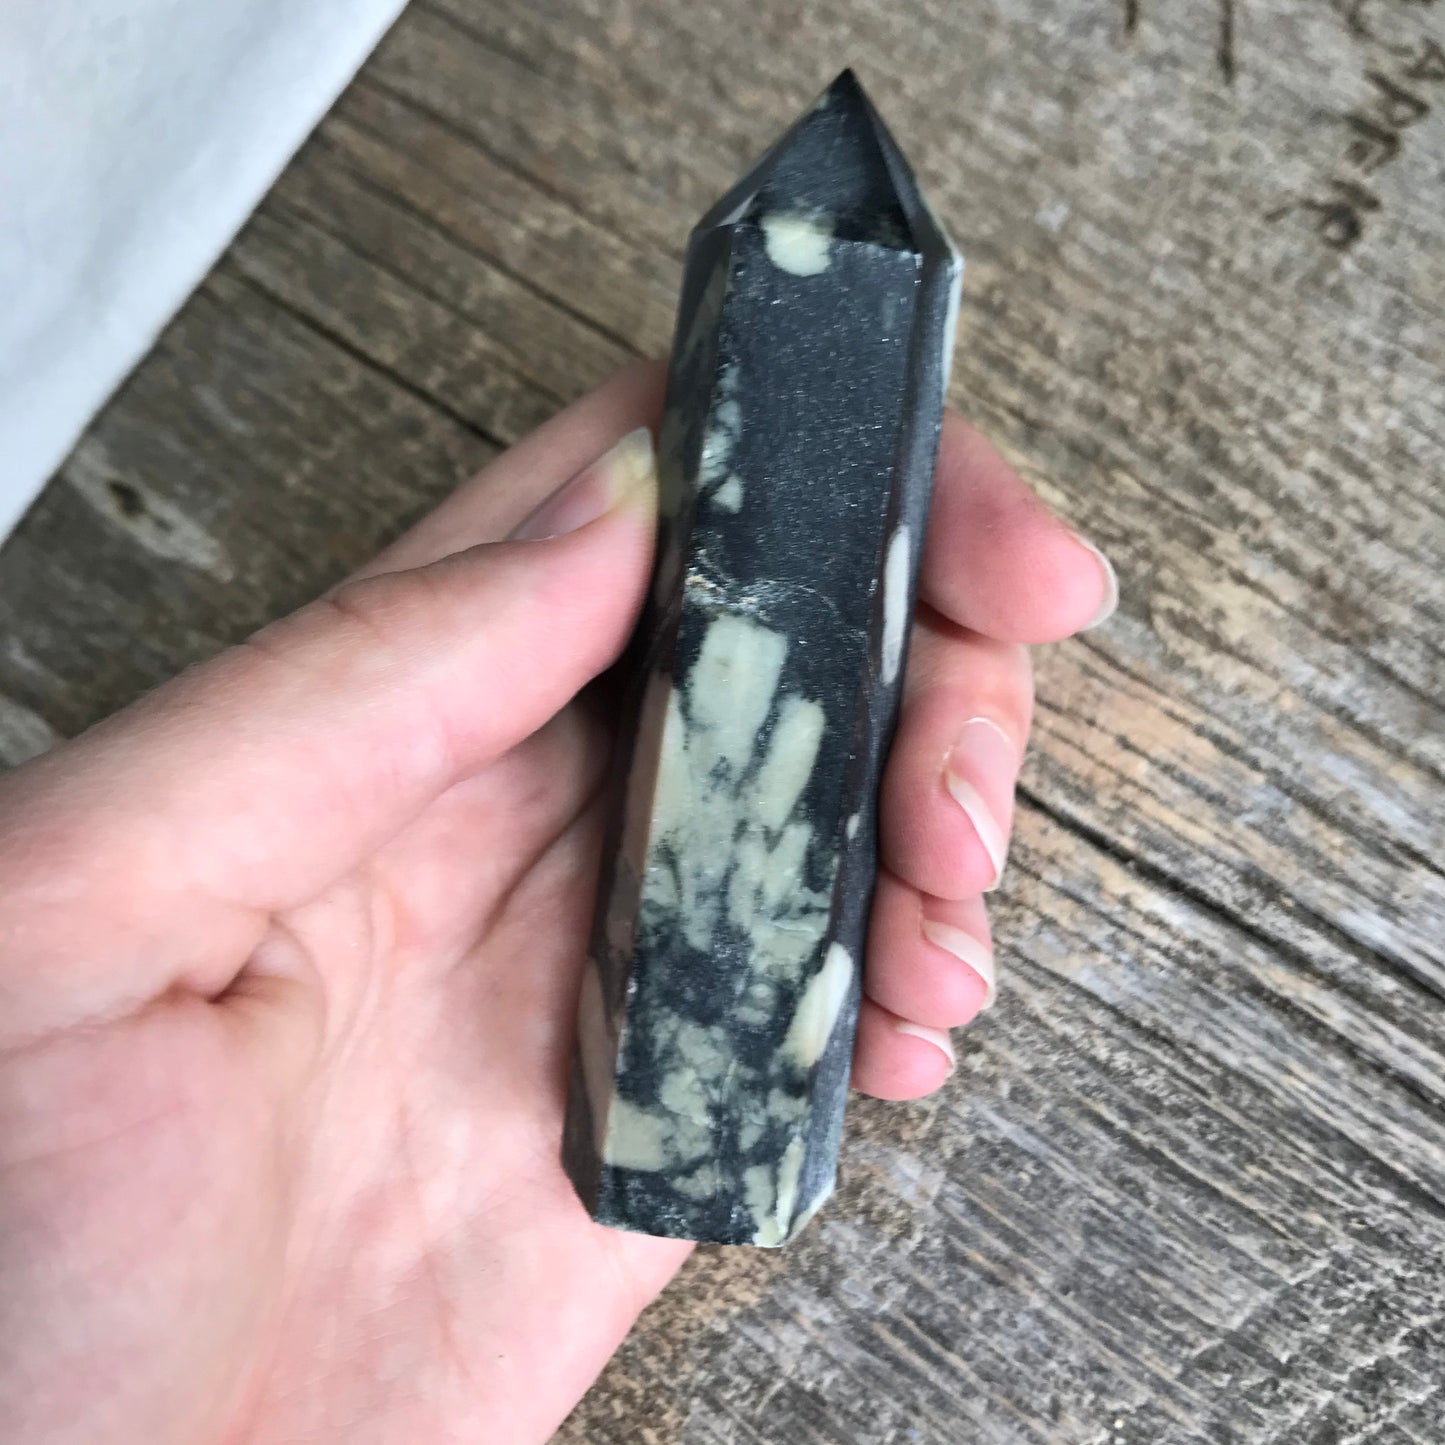 Chrysanthemum Stone Obelisk, (Approx 3 1/4" - 3 5/8") Chrysanthemum Point, Supply for Crystal Grid, Home Decor or Crafts 0892